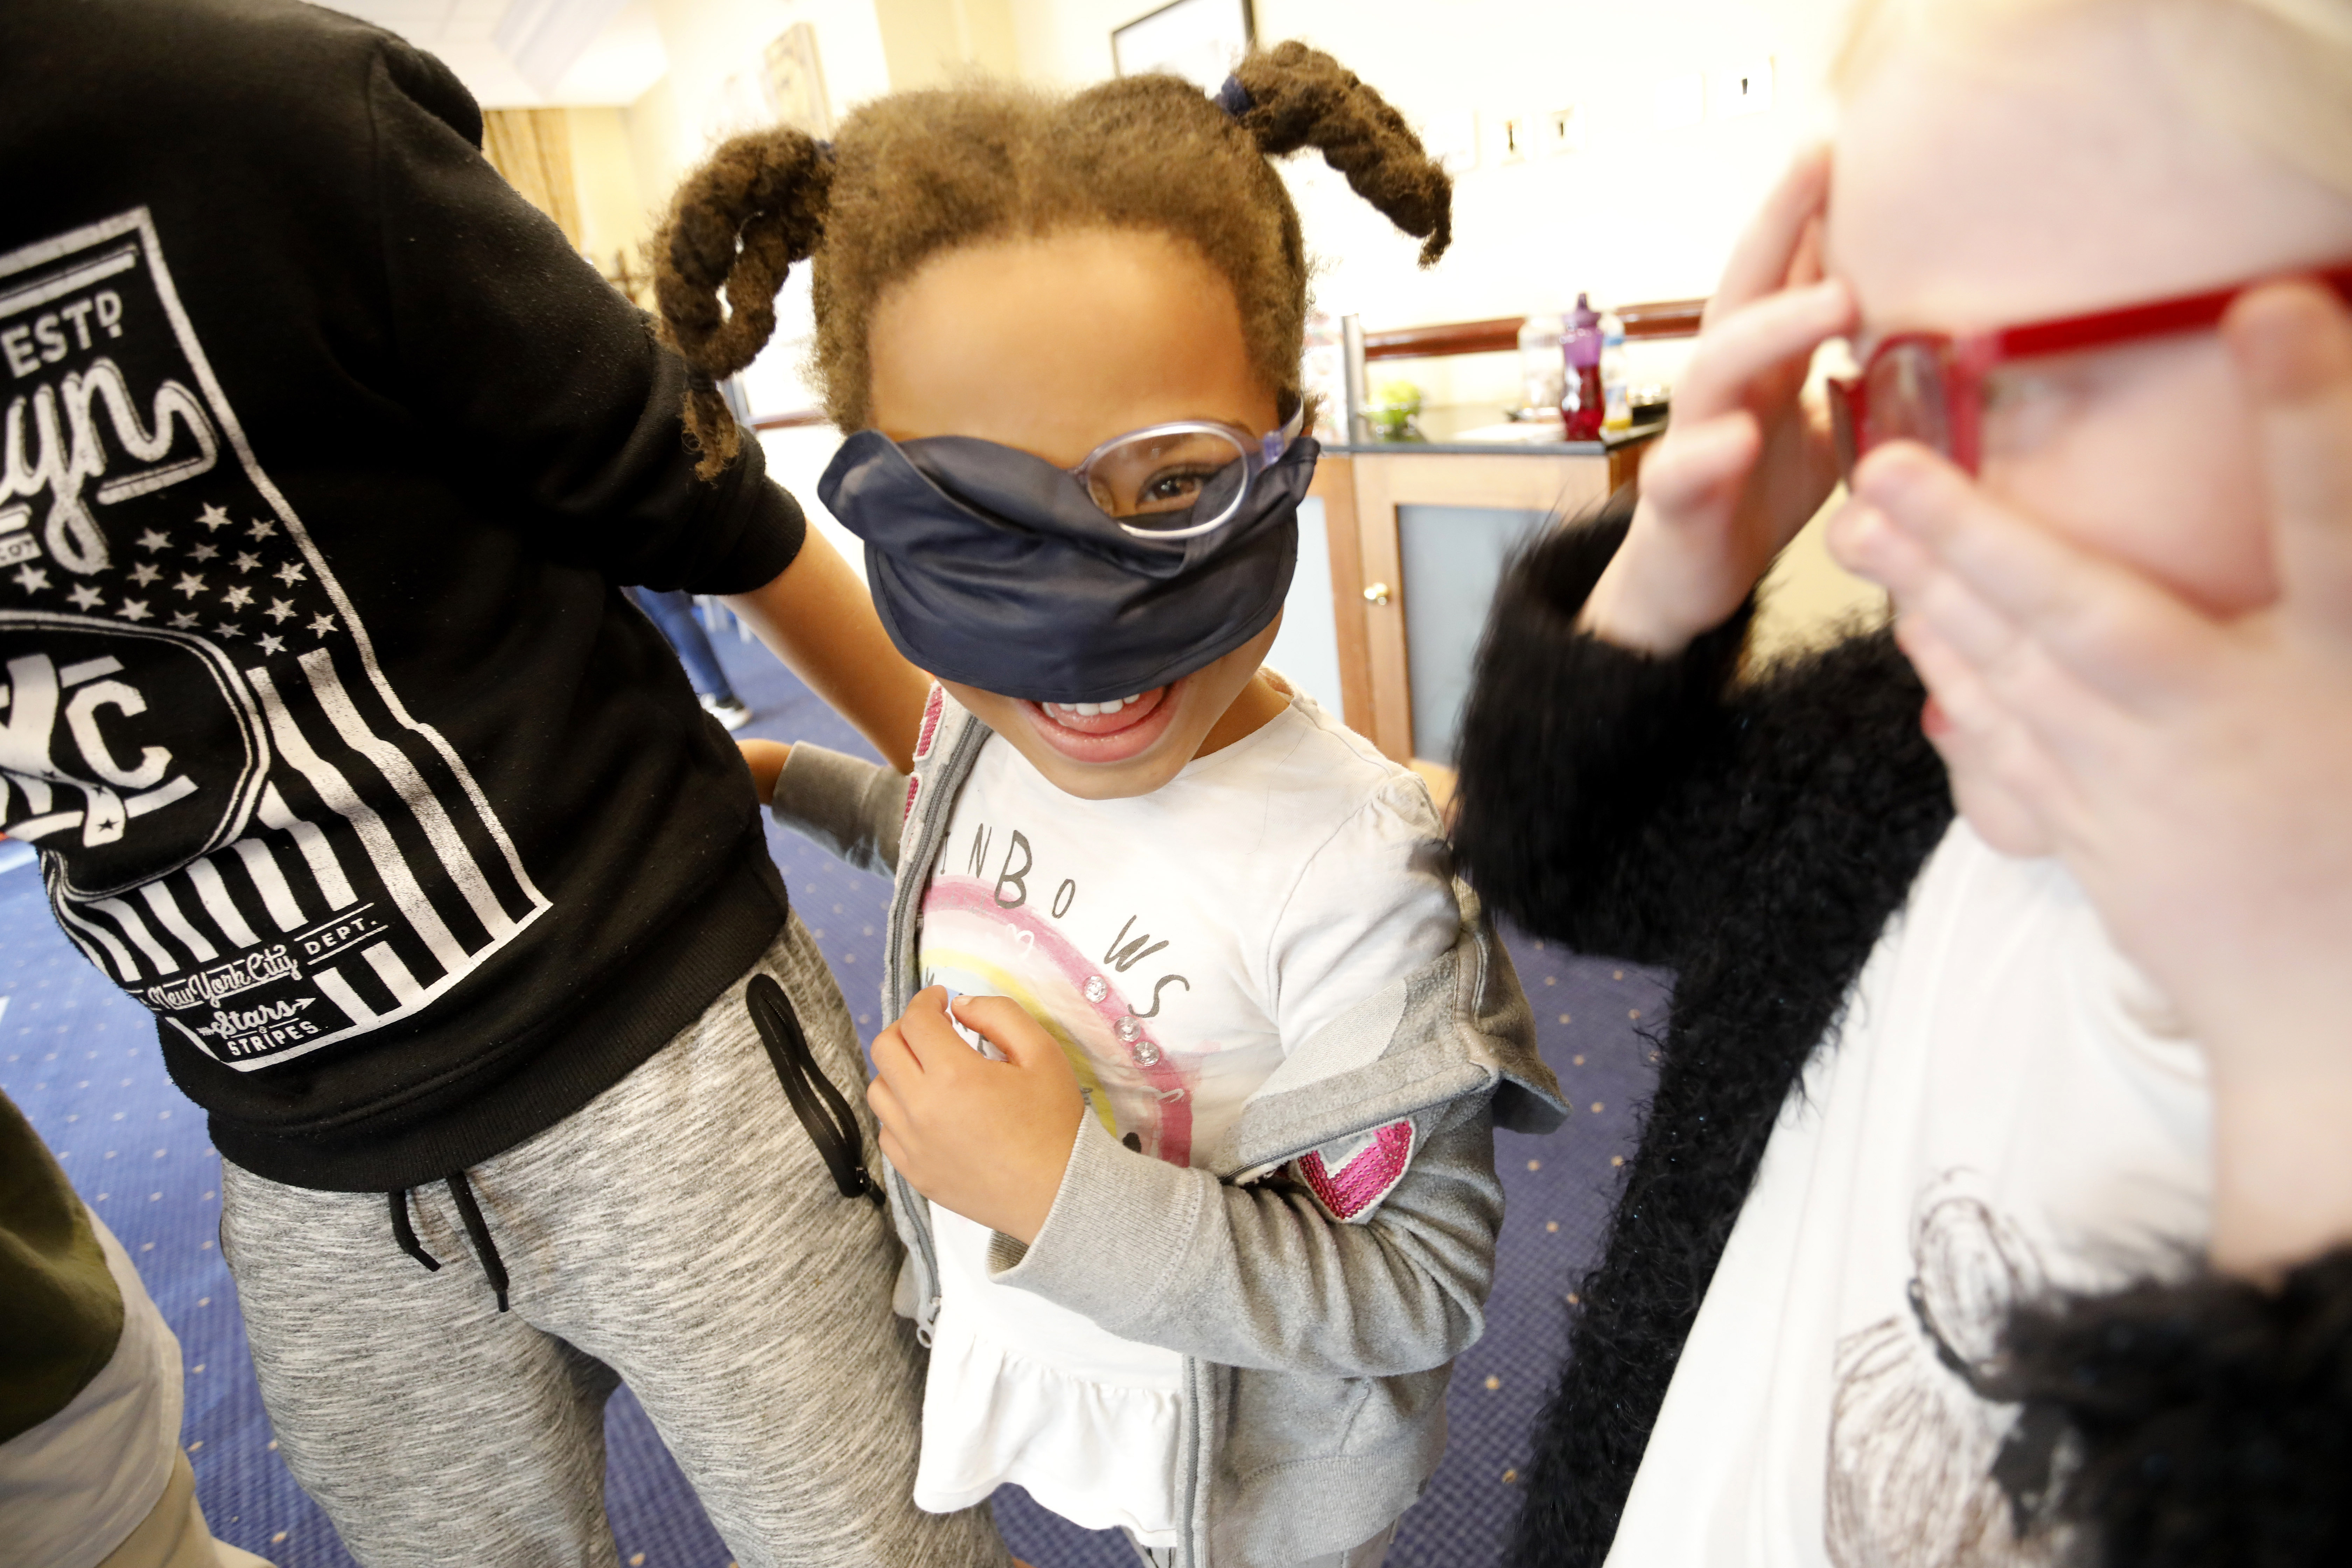 A child playing with her friends. She is wearing a blindfold over her glasses, but looking out over the top with one eye. She is laughing.